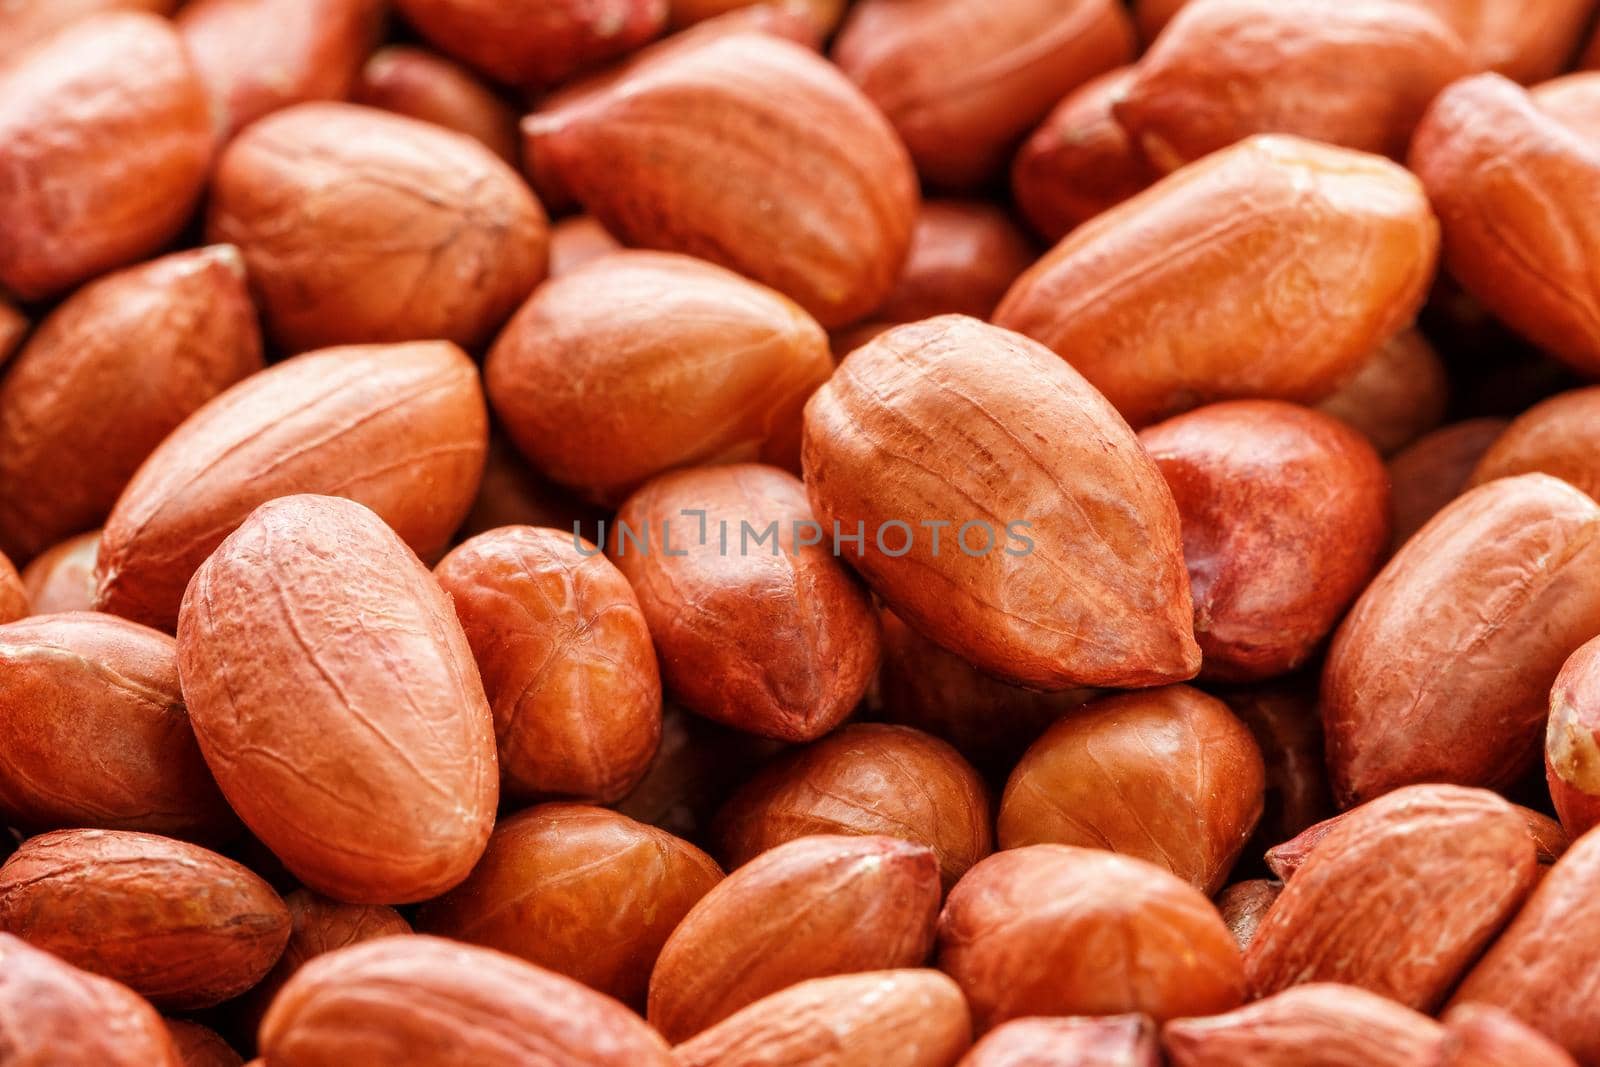 Peanuts, for background or textures, uncleaned inshell peanuts. Peeled peanut on well peanuts